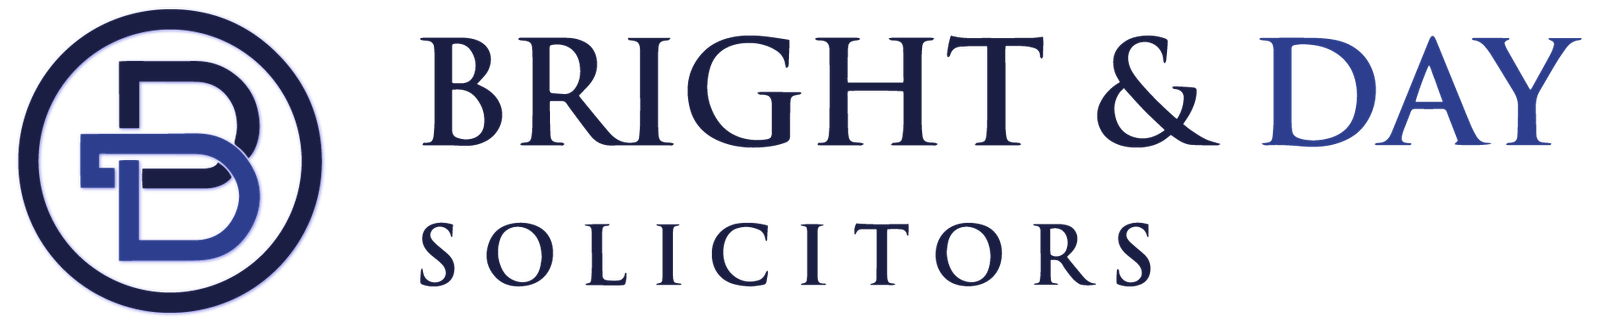 Bright & Day Solicitors